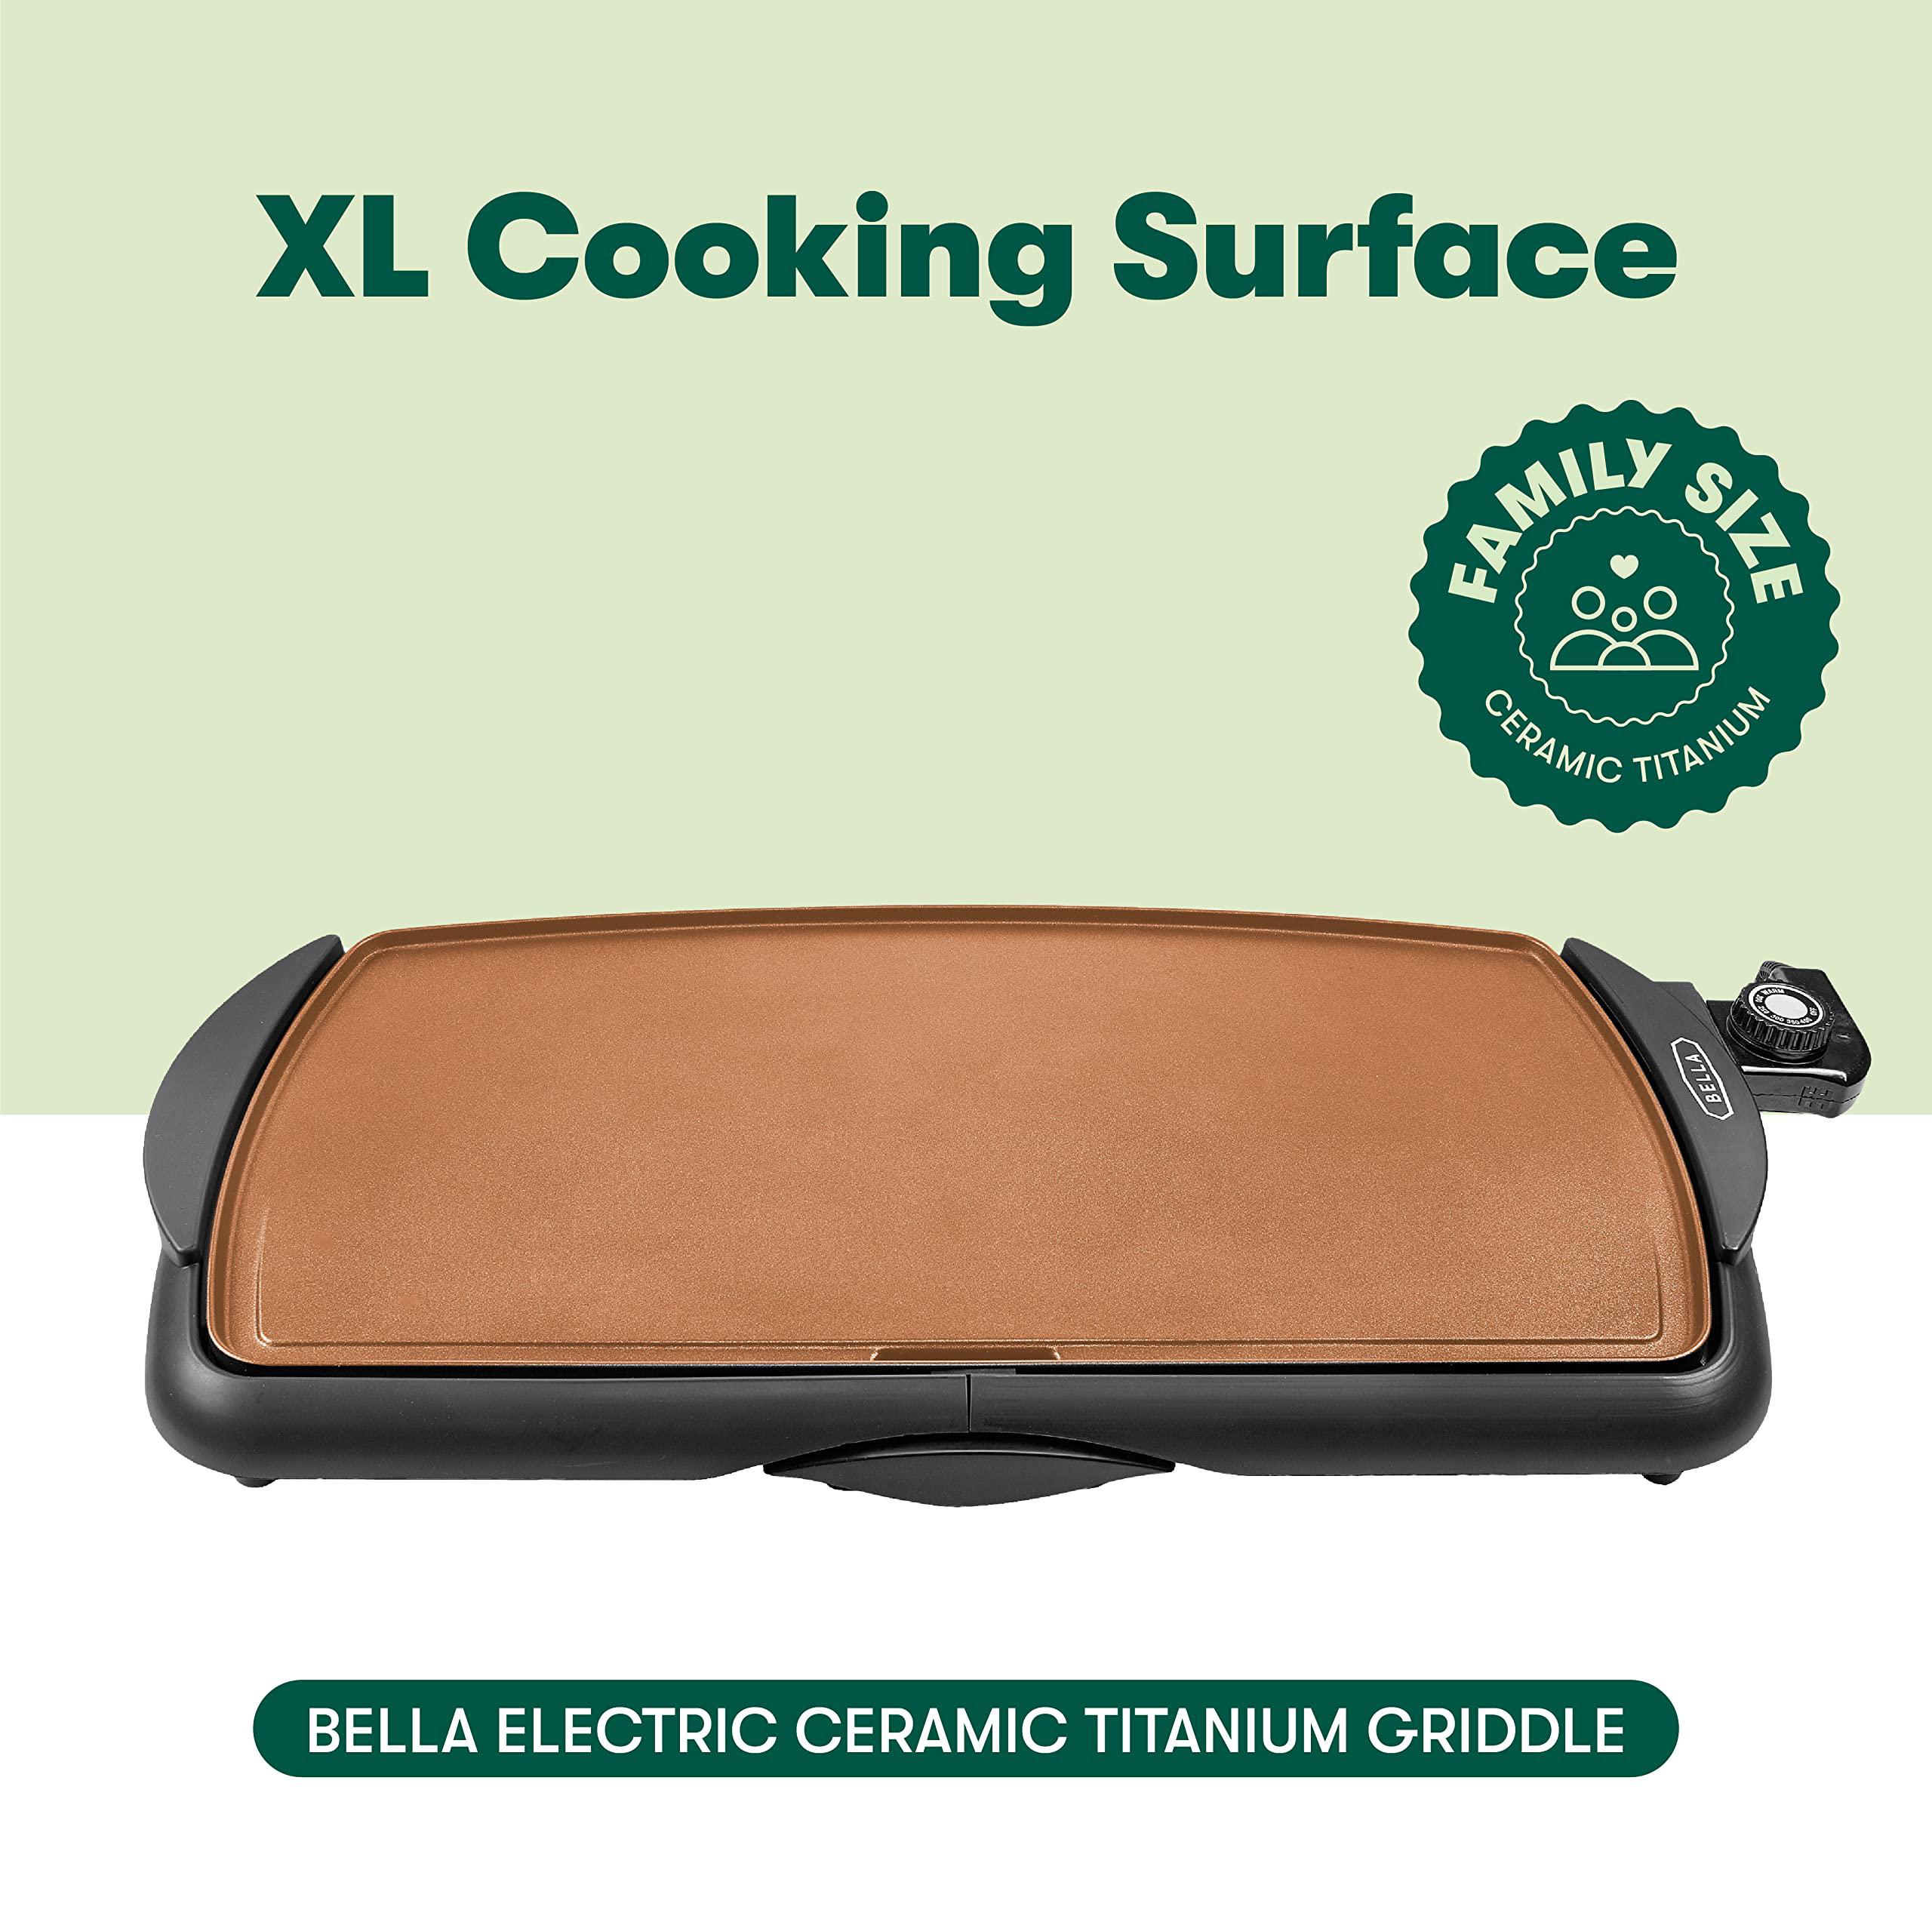 bella electric ceramic titanium griddle, make 10 eggs at once, healthy-eco non-stick coating, hassle-free clean up, large sub